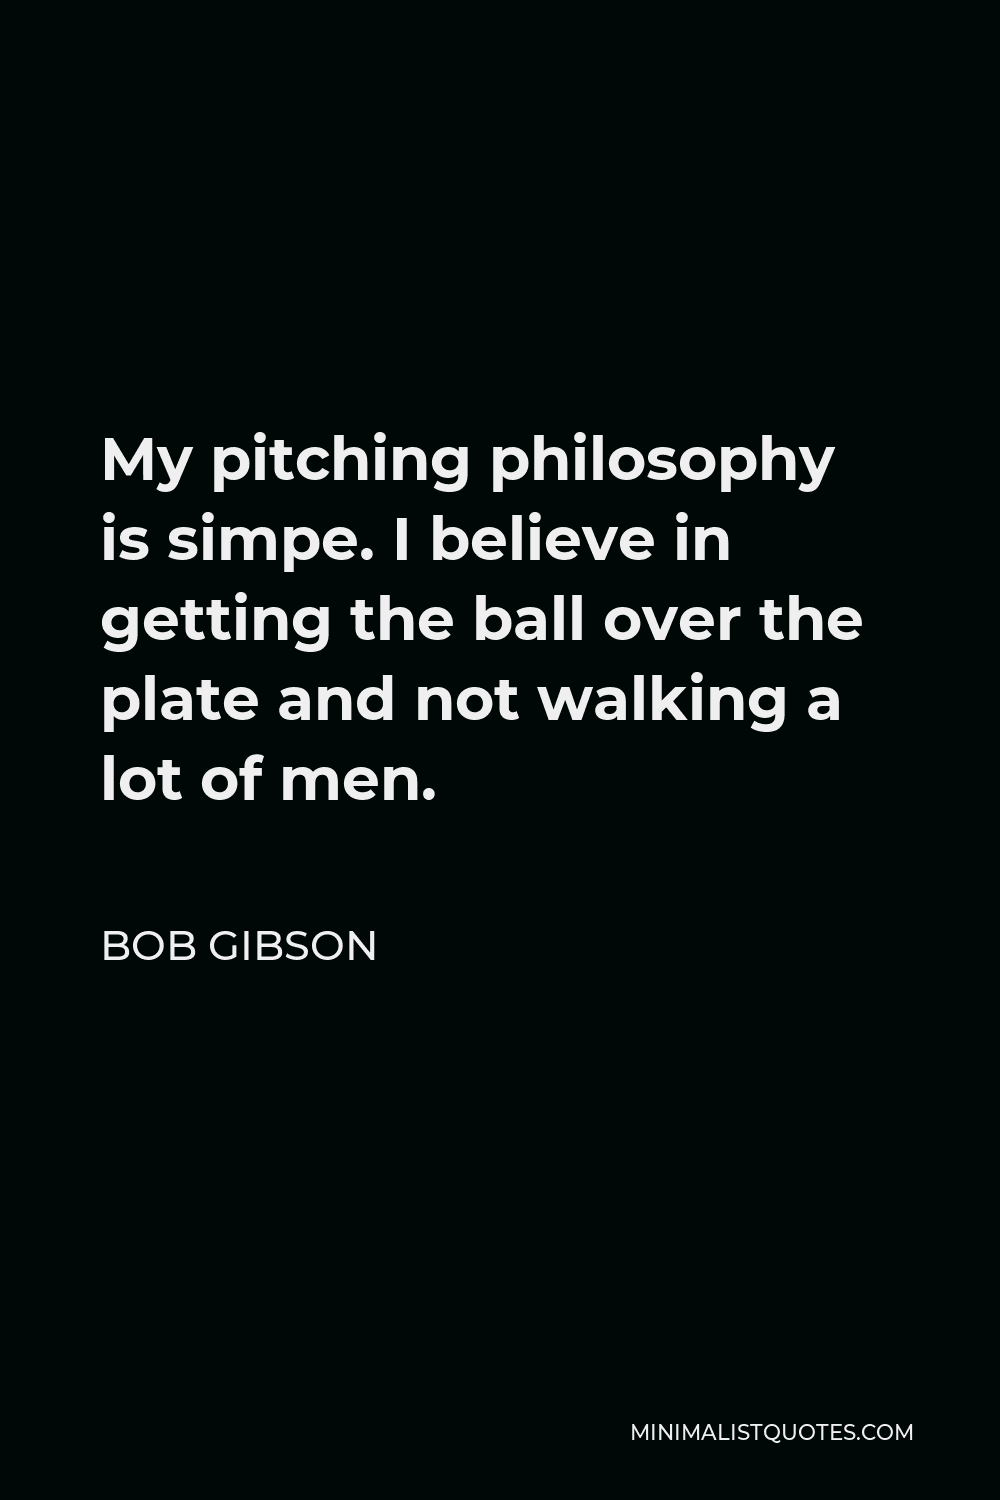 Bob Gibson Quote - My pitching philosophy is simpe. I believe in getting the ball over the plate and not walking a lot of men.